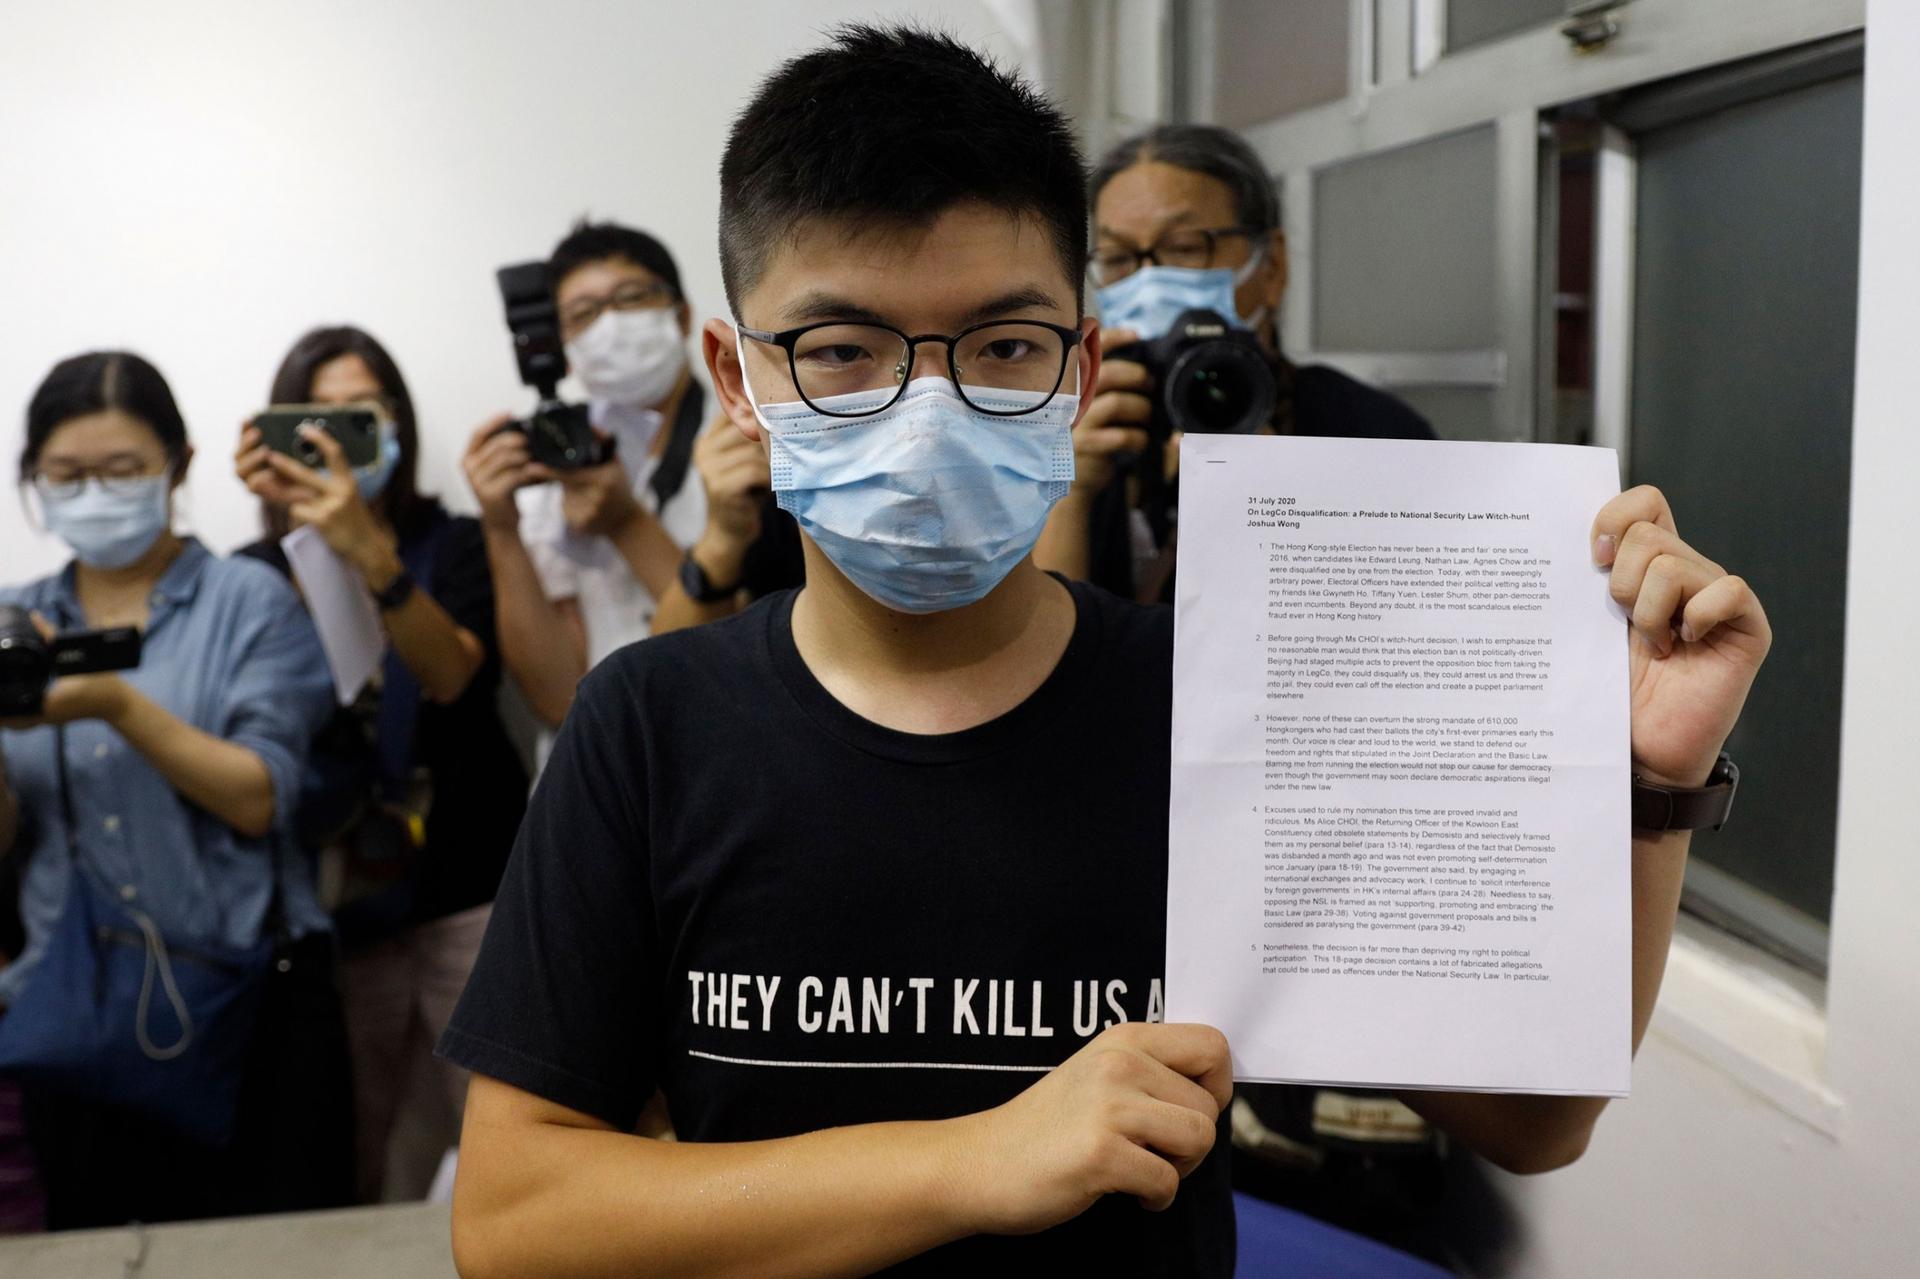 Hong Kong pro-democracy activist Joshua Wong is shown wearing a face mask a glasses while holding a white document up to the camera.